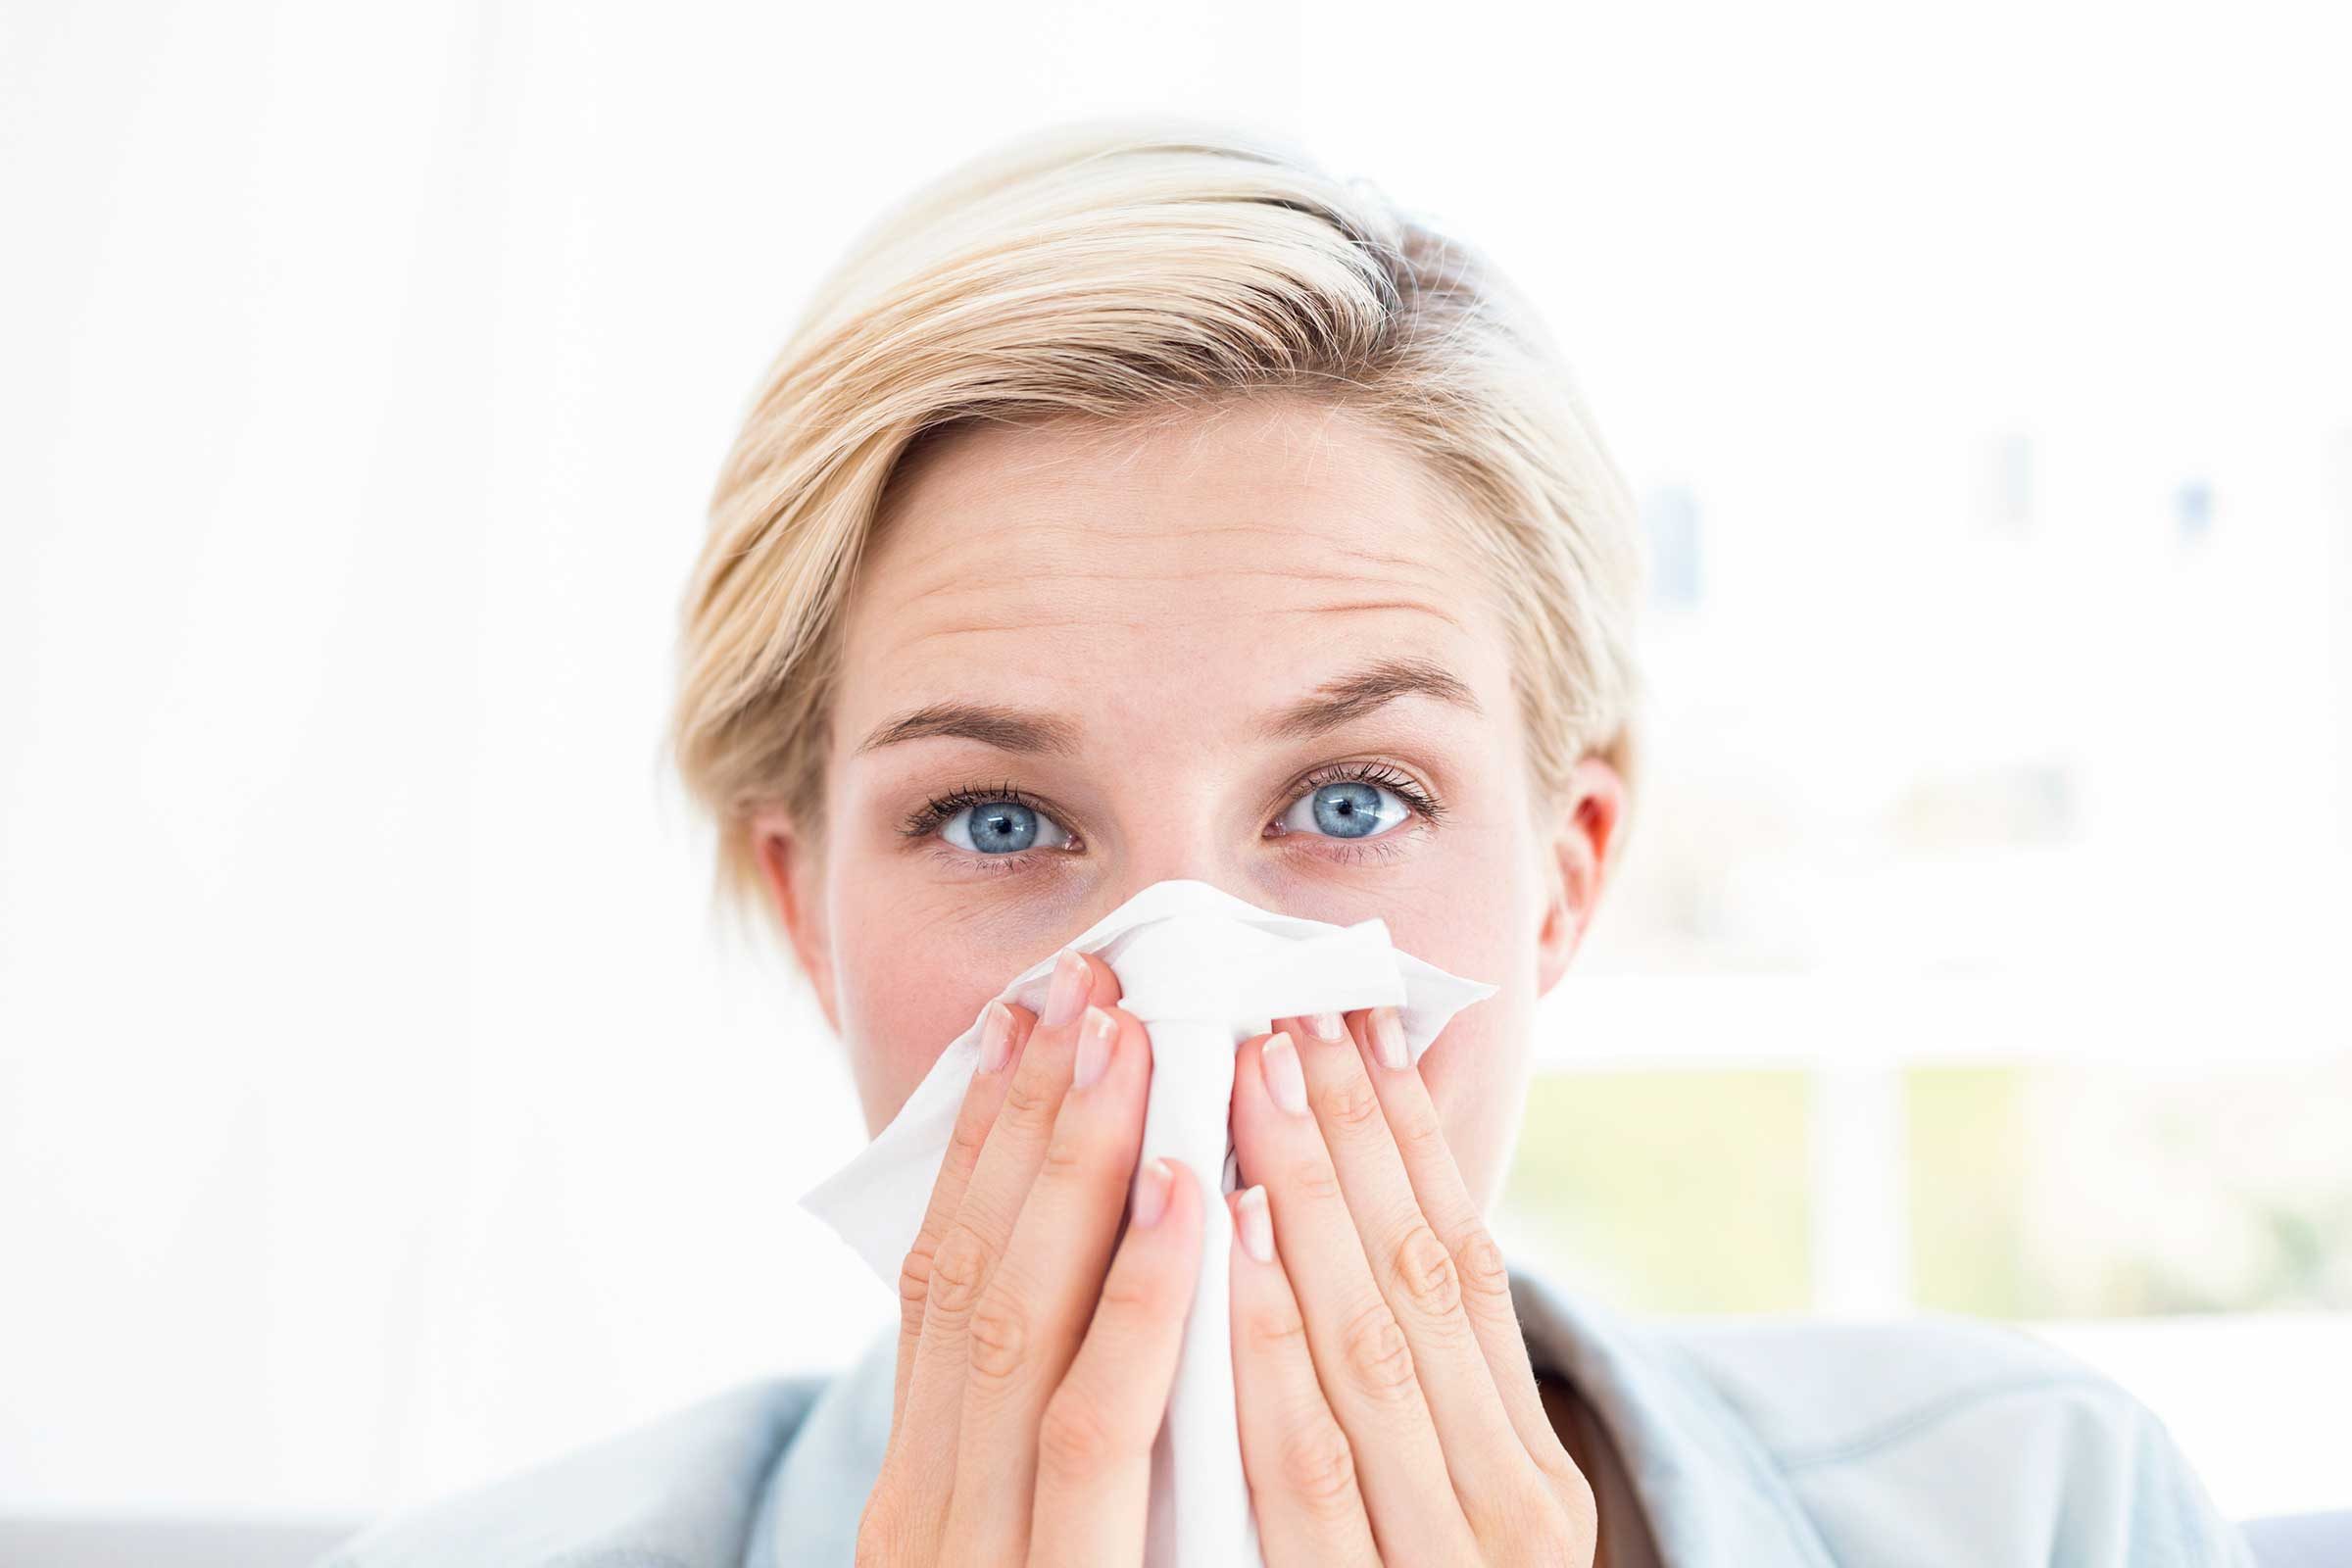 Runny Nose 12 Reasons Your Nose Is Running Readers Digest